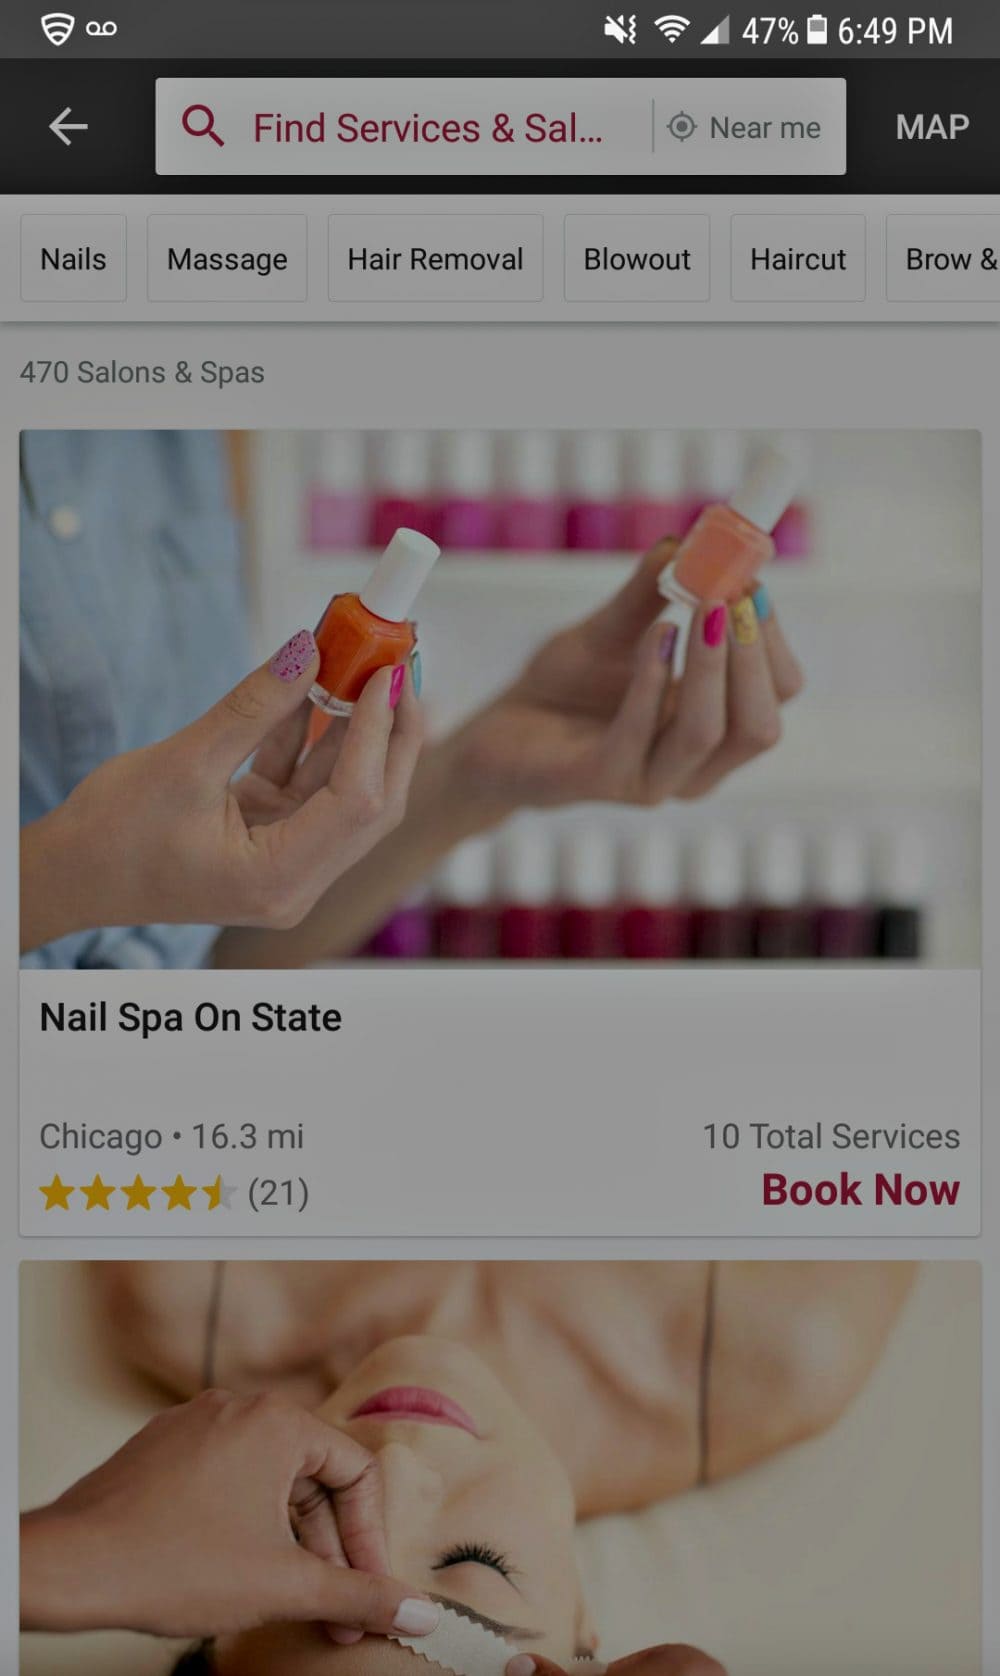 Salon Services Via the Groupon App Giveaway #GrouponBeautyNow #GetBeautyNow AD